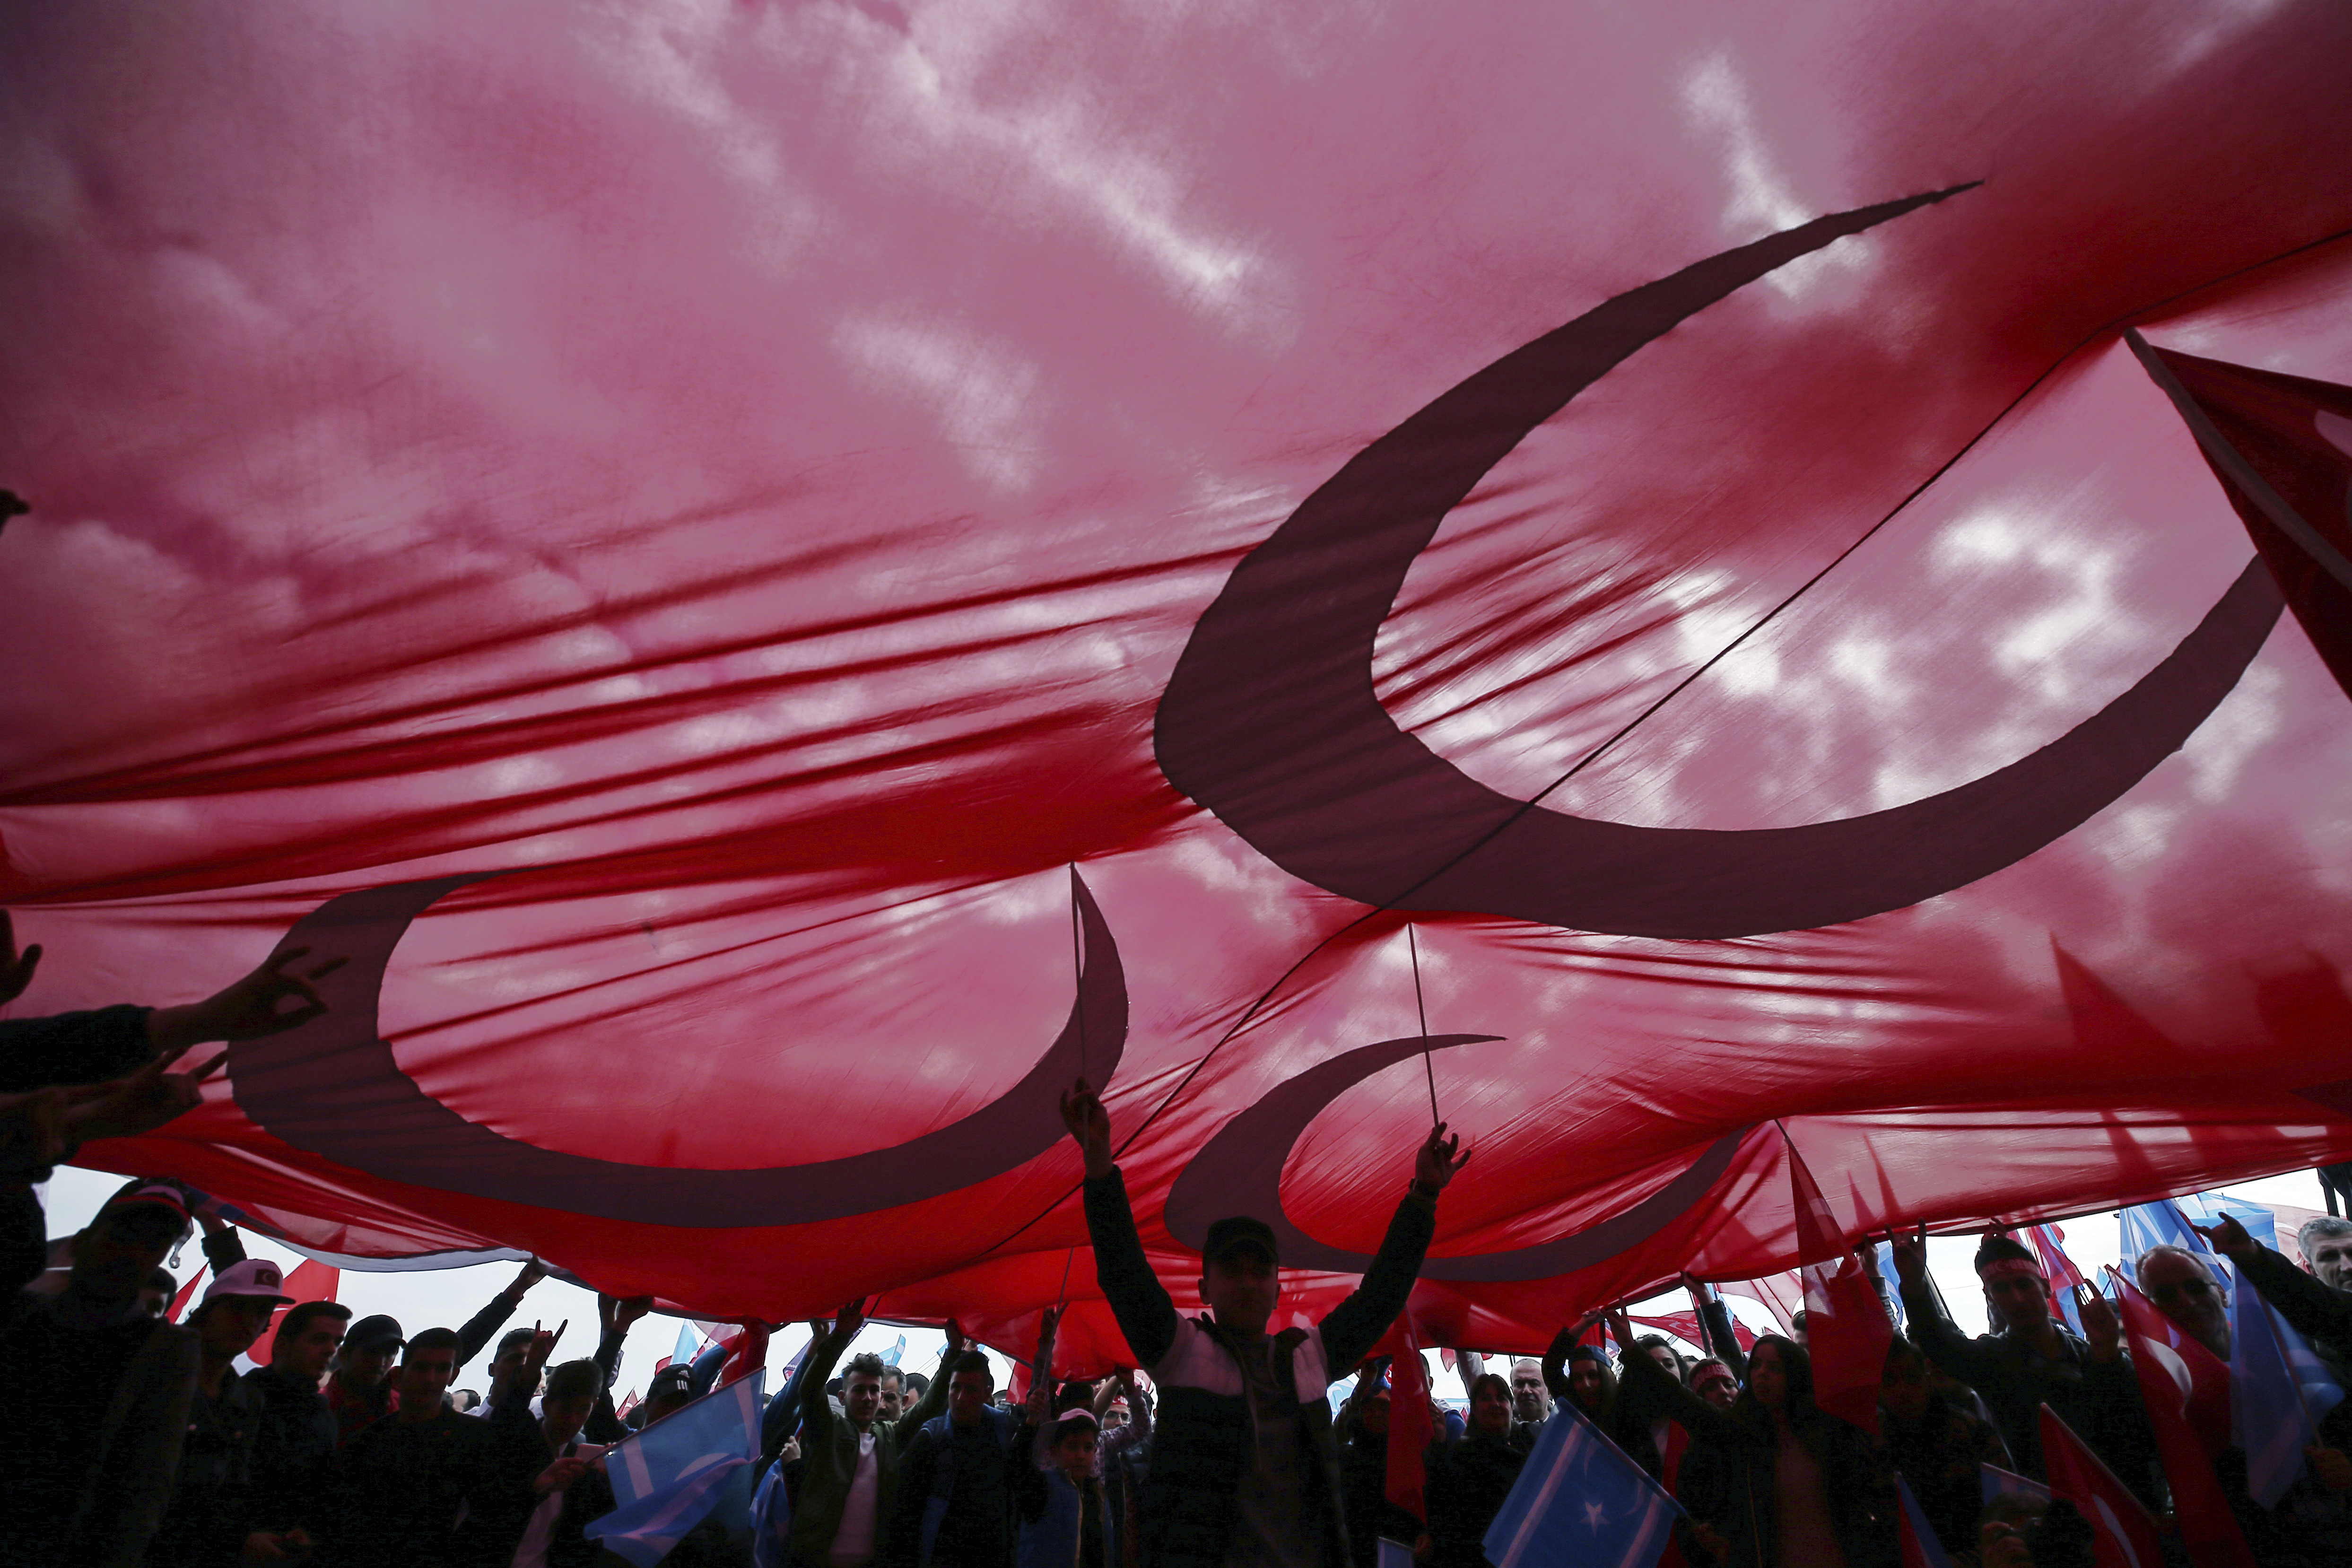 Supporters hold a huge flag as they listen to Devlet Bahceli, the leader of Turkey's opposition Nationalist Movement Party, who supports President Recep Tayyip Erdogan, during a referendum rally in Istanbul, Sunday, April 9, 2017. Turkey is heading to a contentious April 16 referendum on constitutional reforms to expand Erdogan's powers.(AP Photo/Emrah Gurel)